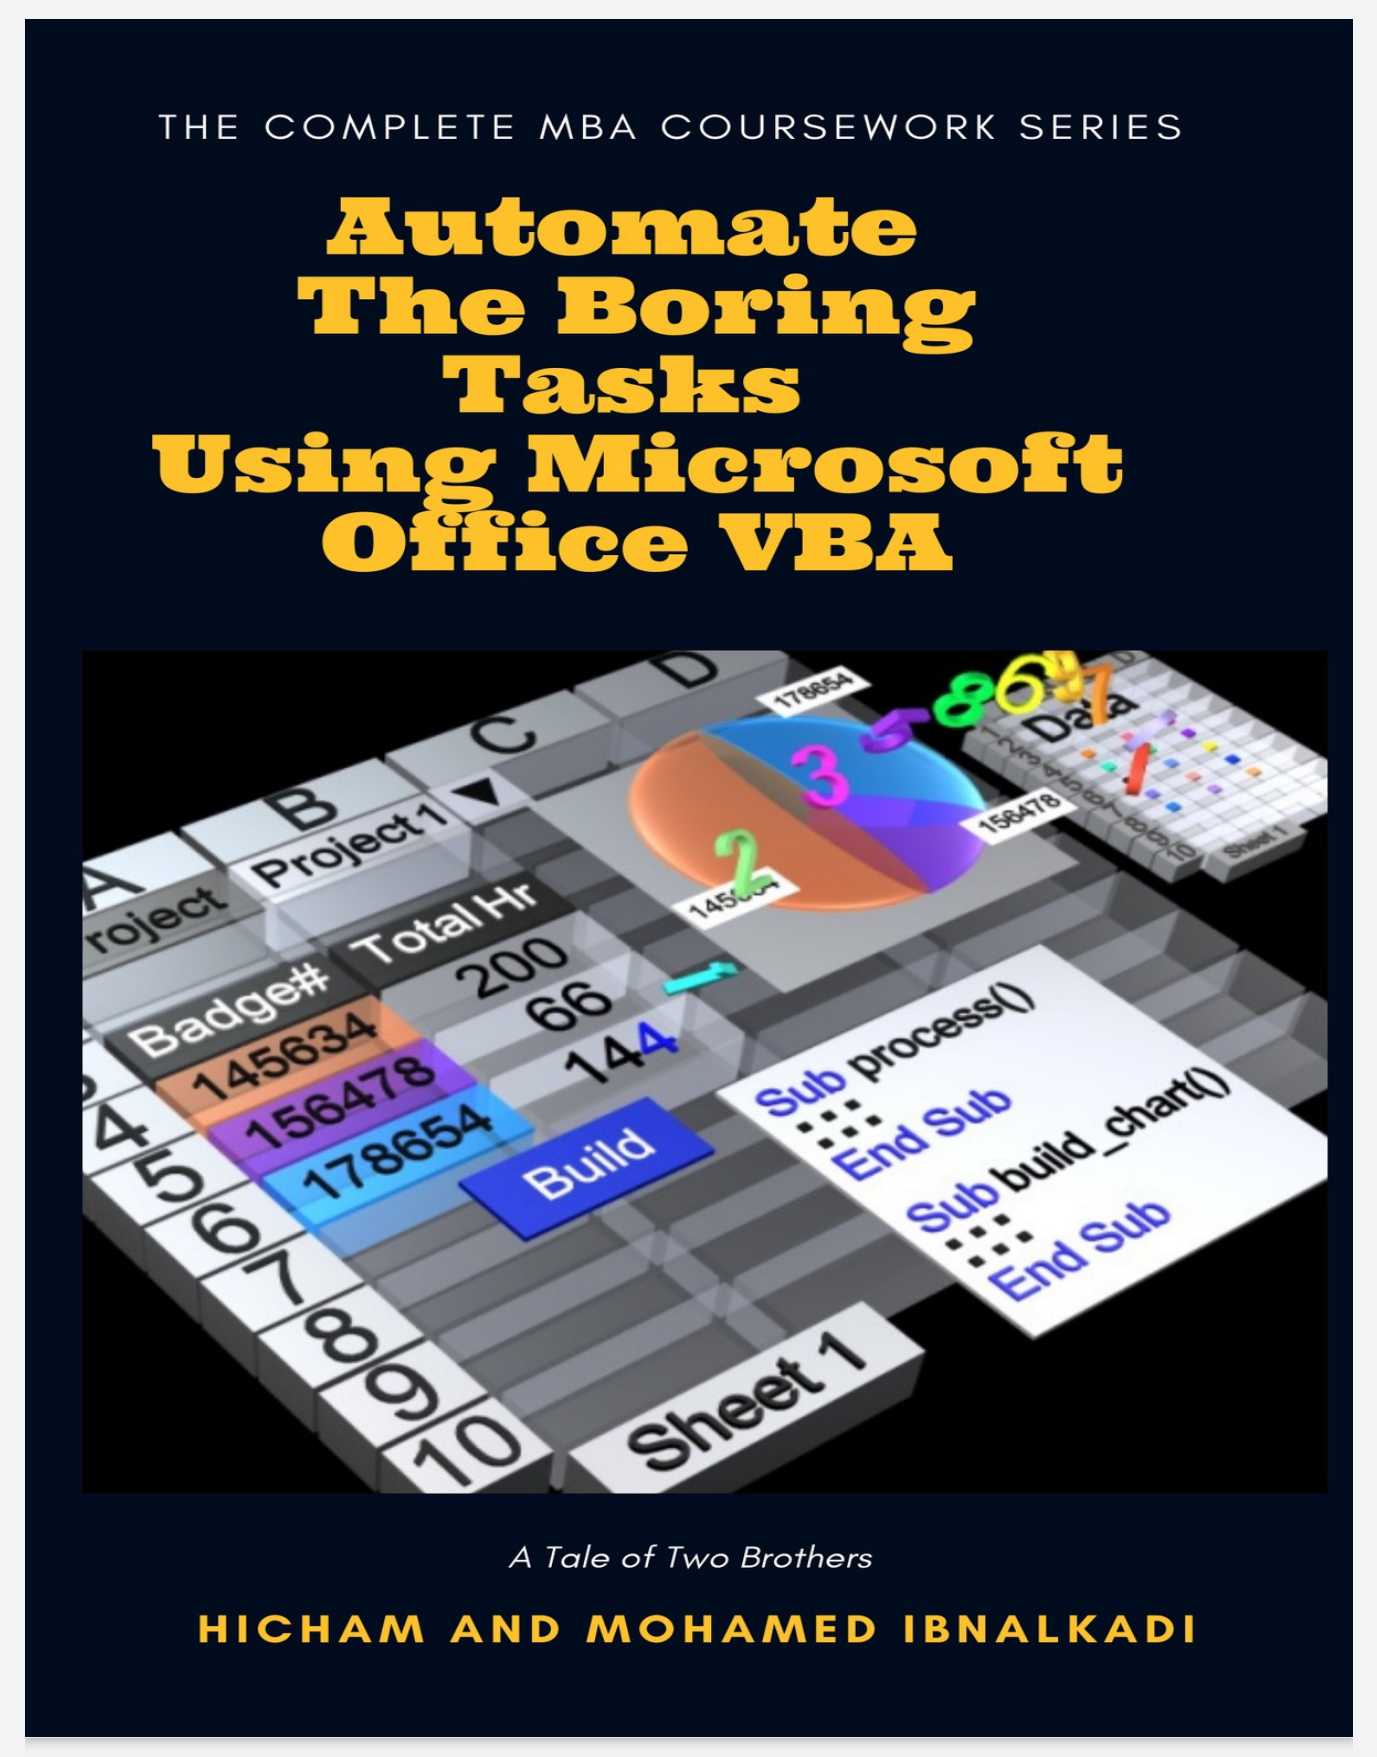 Automate The Boring Tasks Using Microsoft Office VBA (The Complete MBA CourseWork Series)